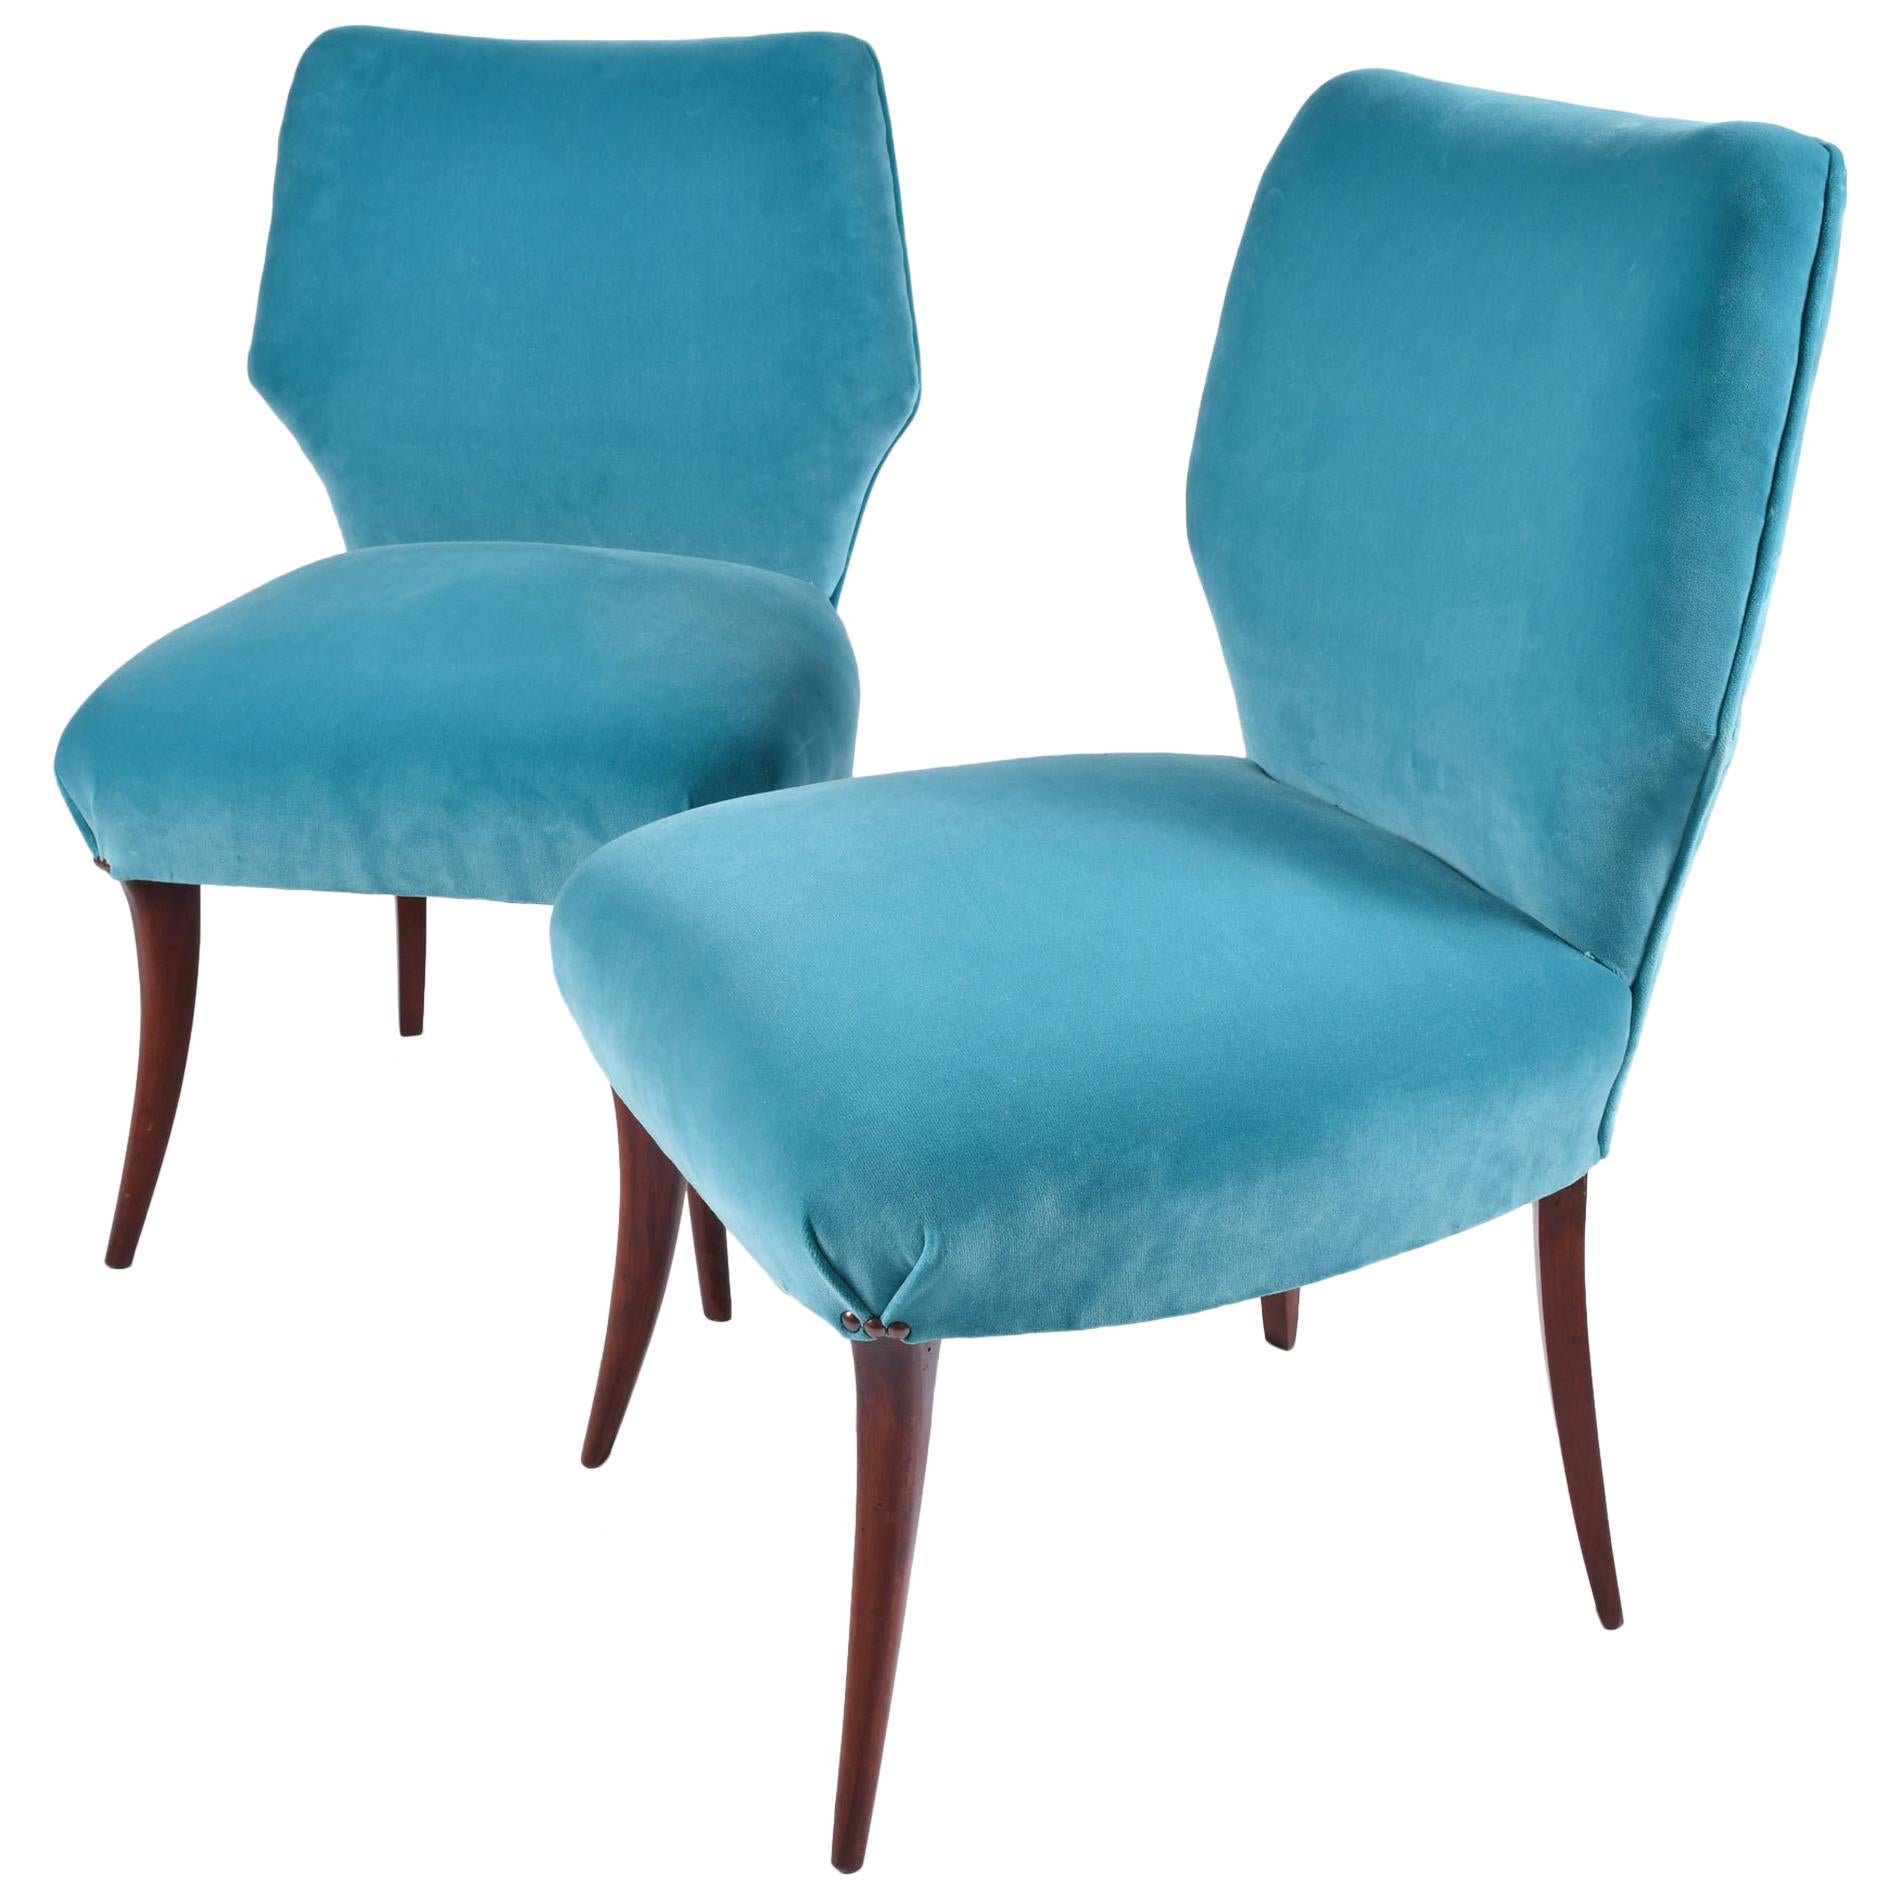 Pair of 1950s Italian Turquoise Occasional Chairs